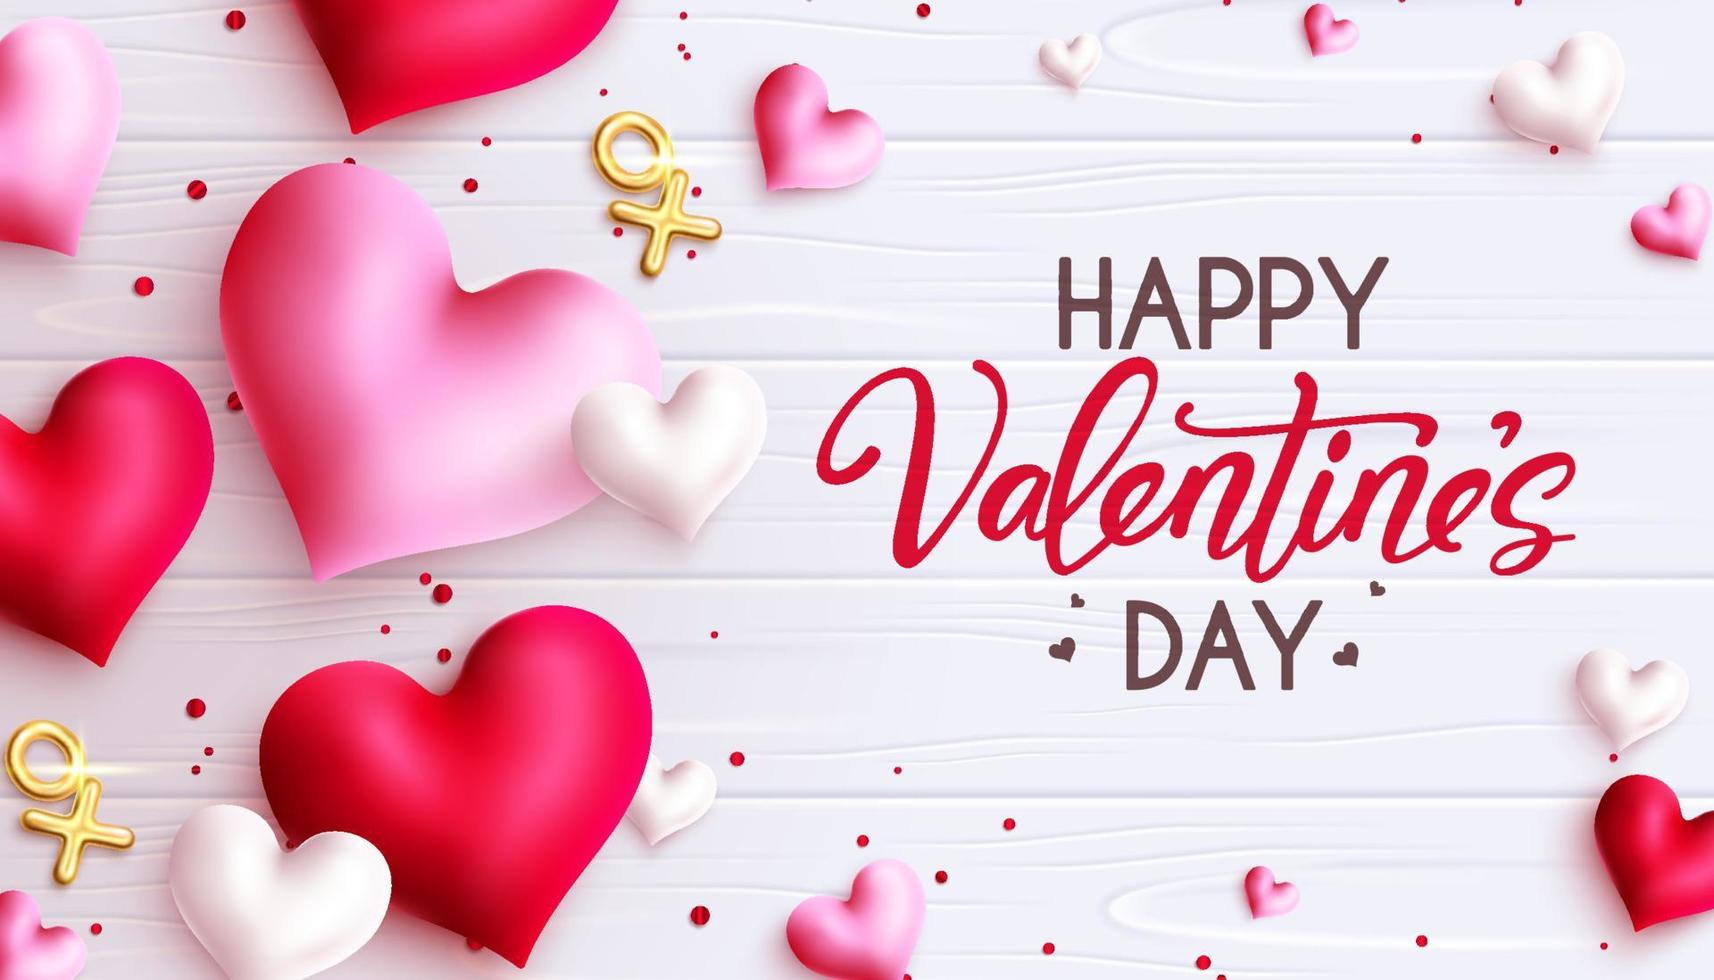 Valentines day greeting vector design. Happy valentine's day typography text with floating hearts in pink podium and space for valentine celebration decoration elements. Vector illustration.